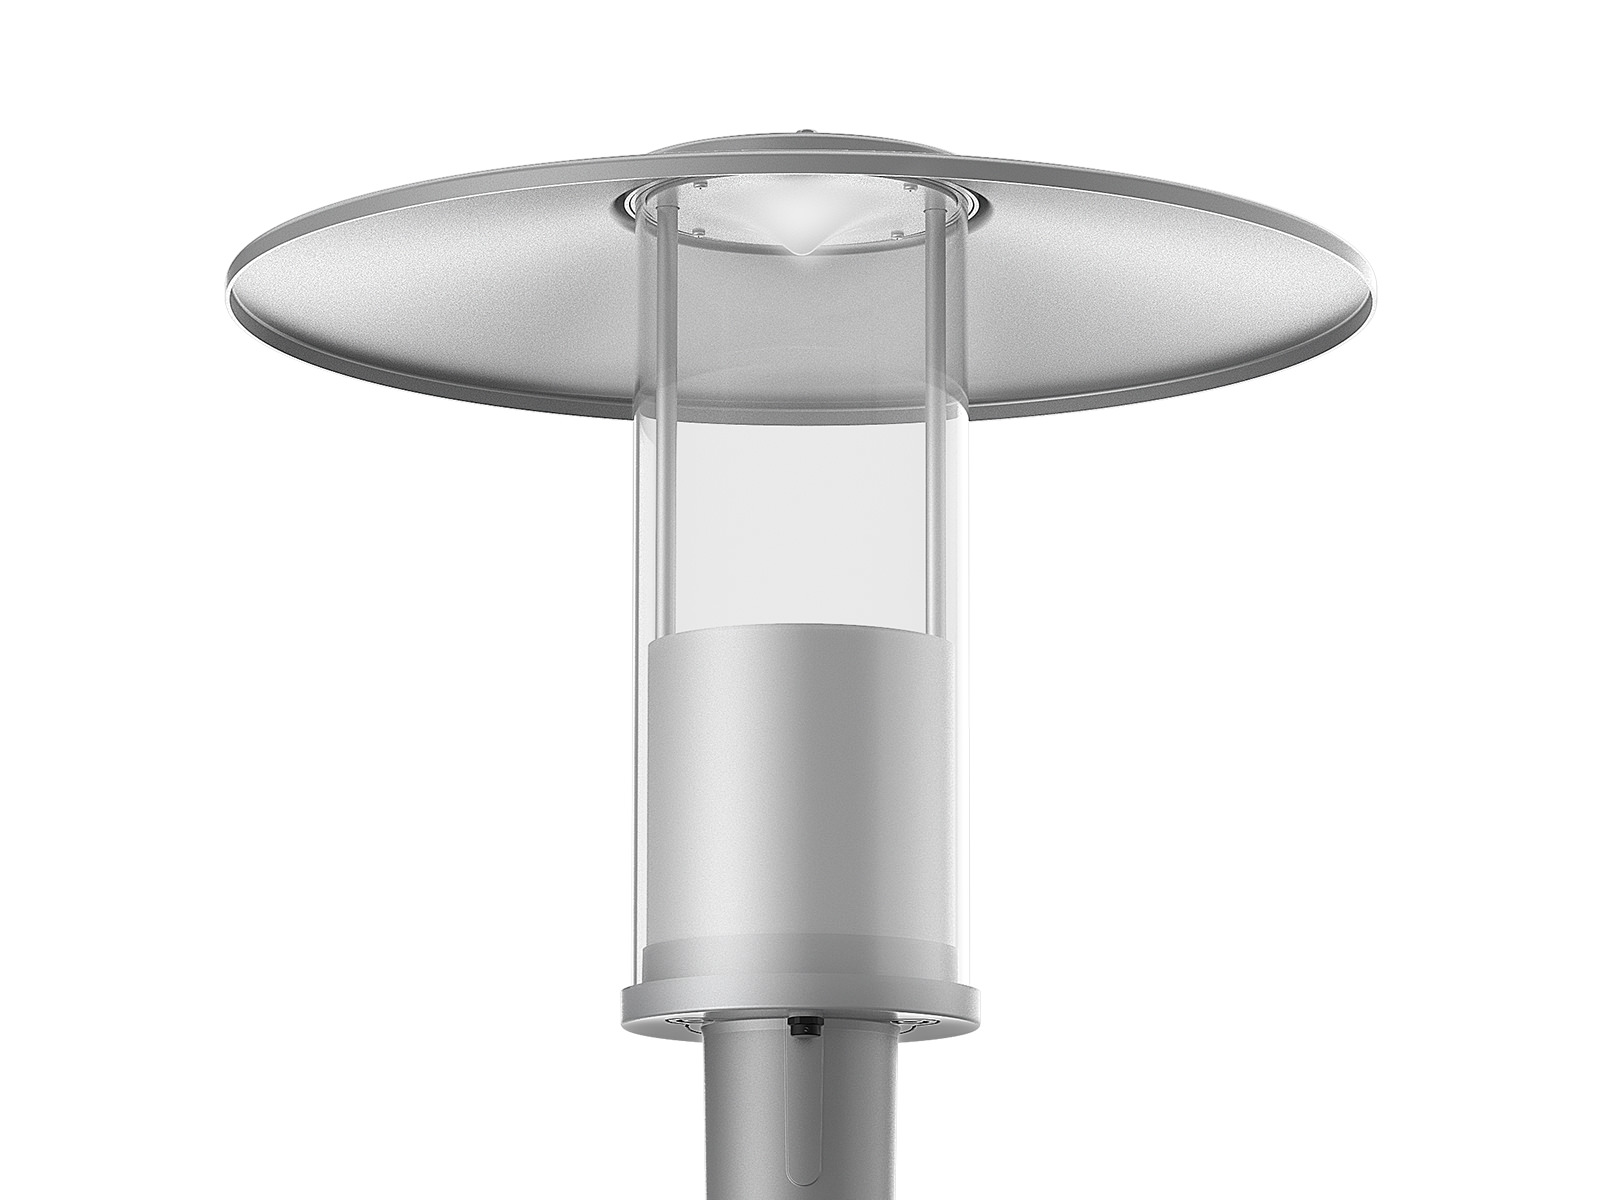 PT03 LED Post Top Light for public outdoor spaces